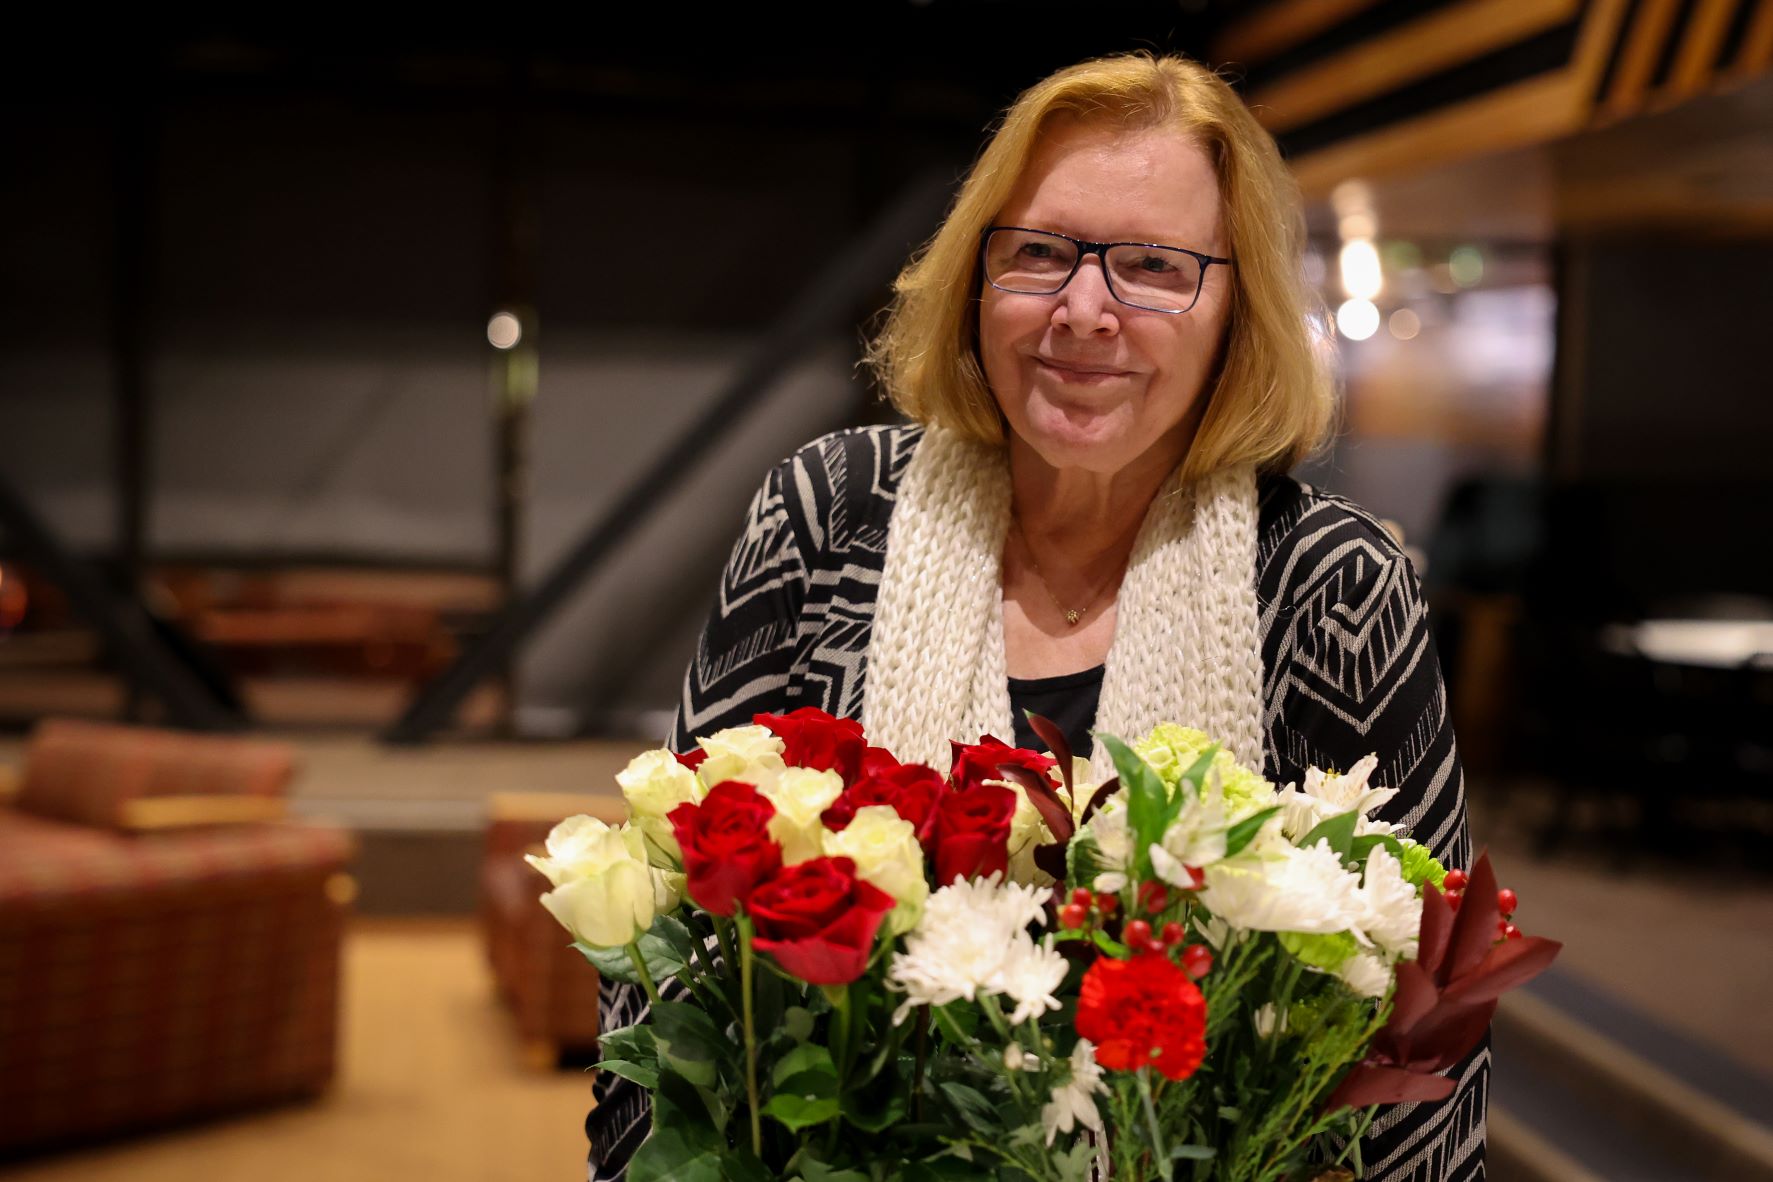 Jill Janke holding flowers and smiling